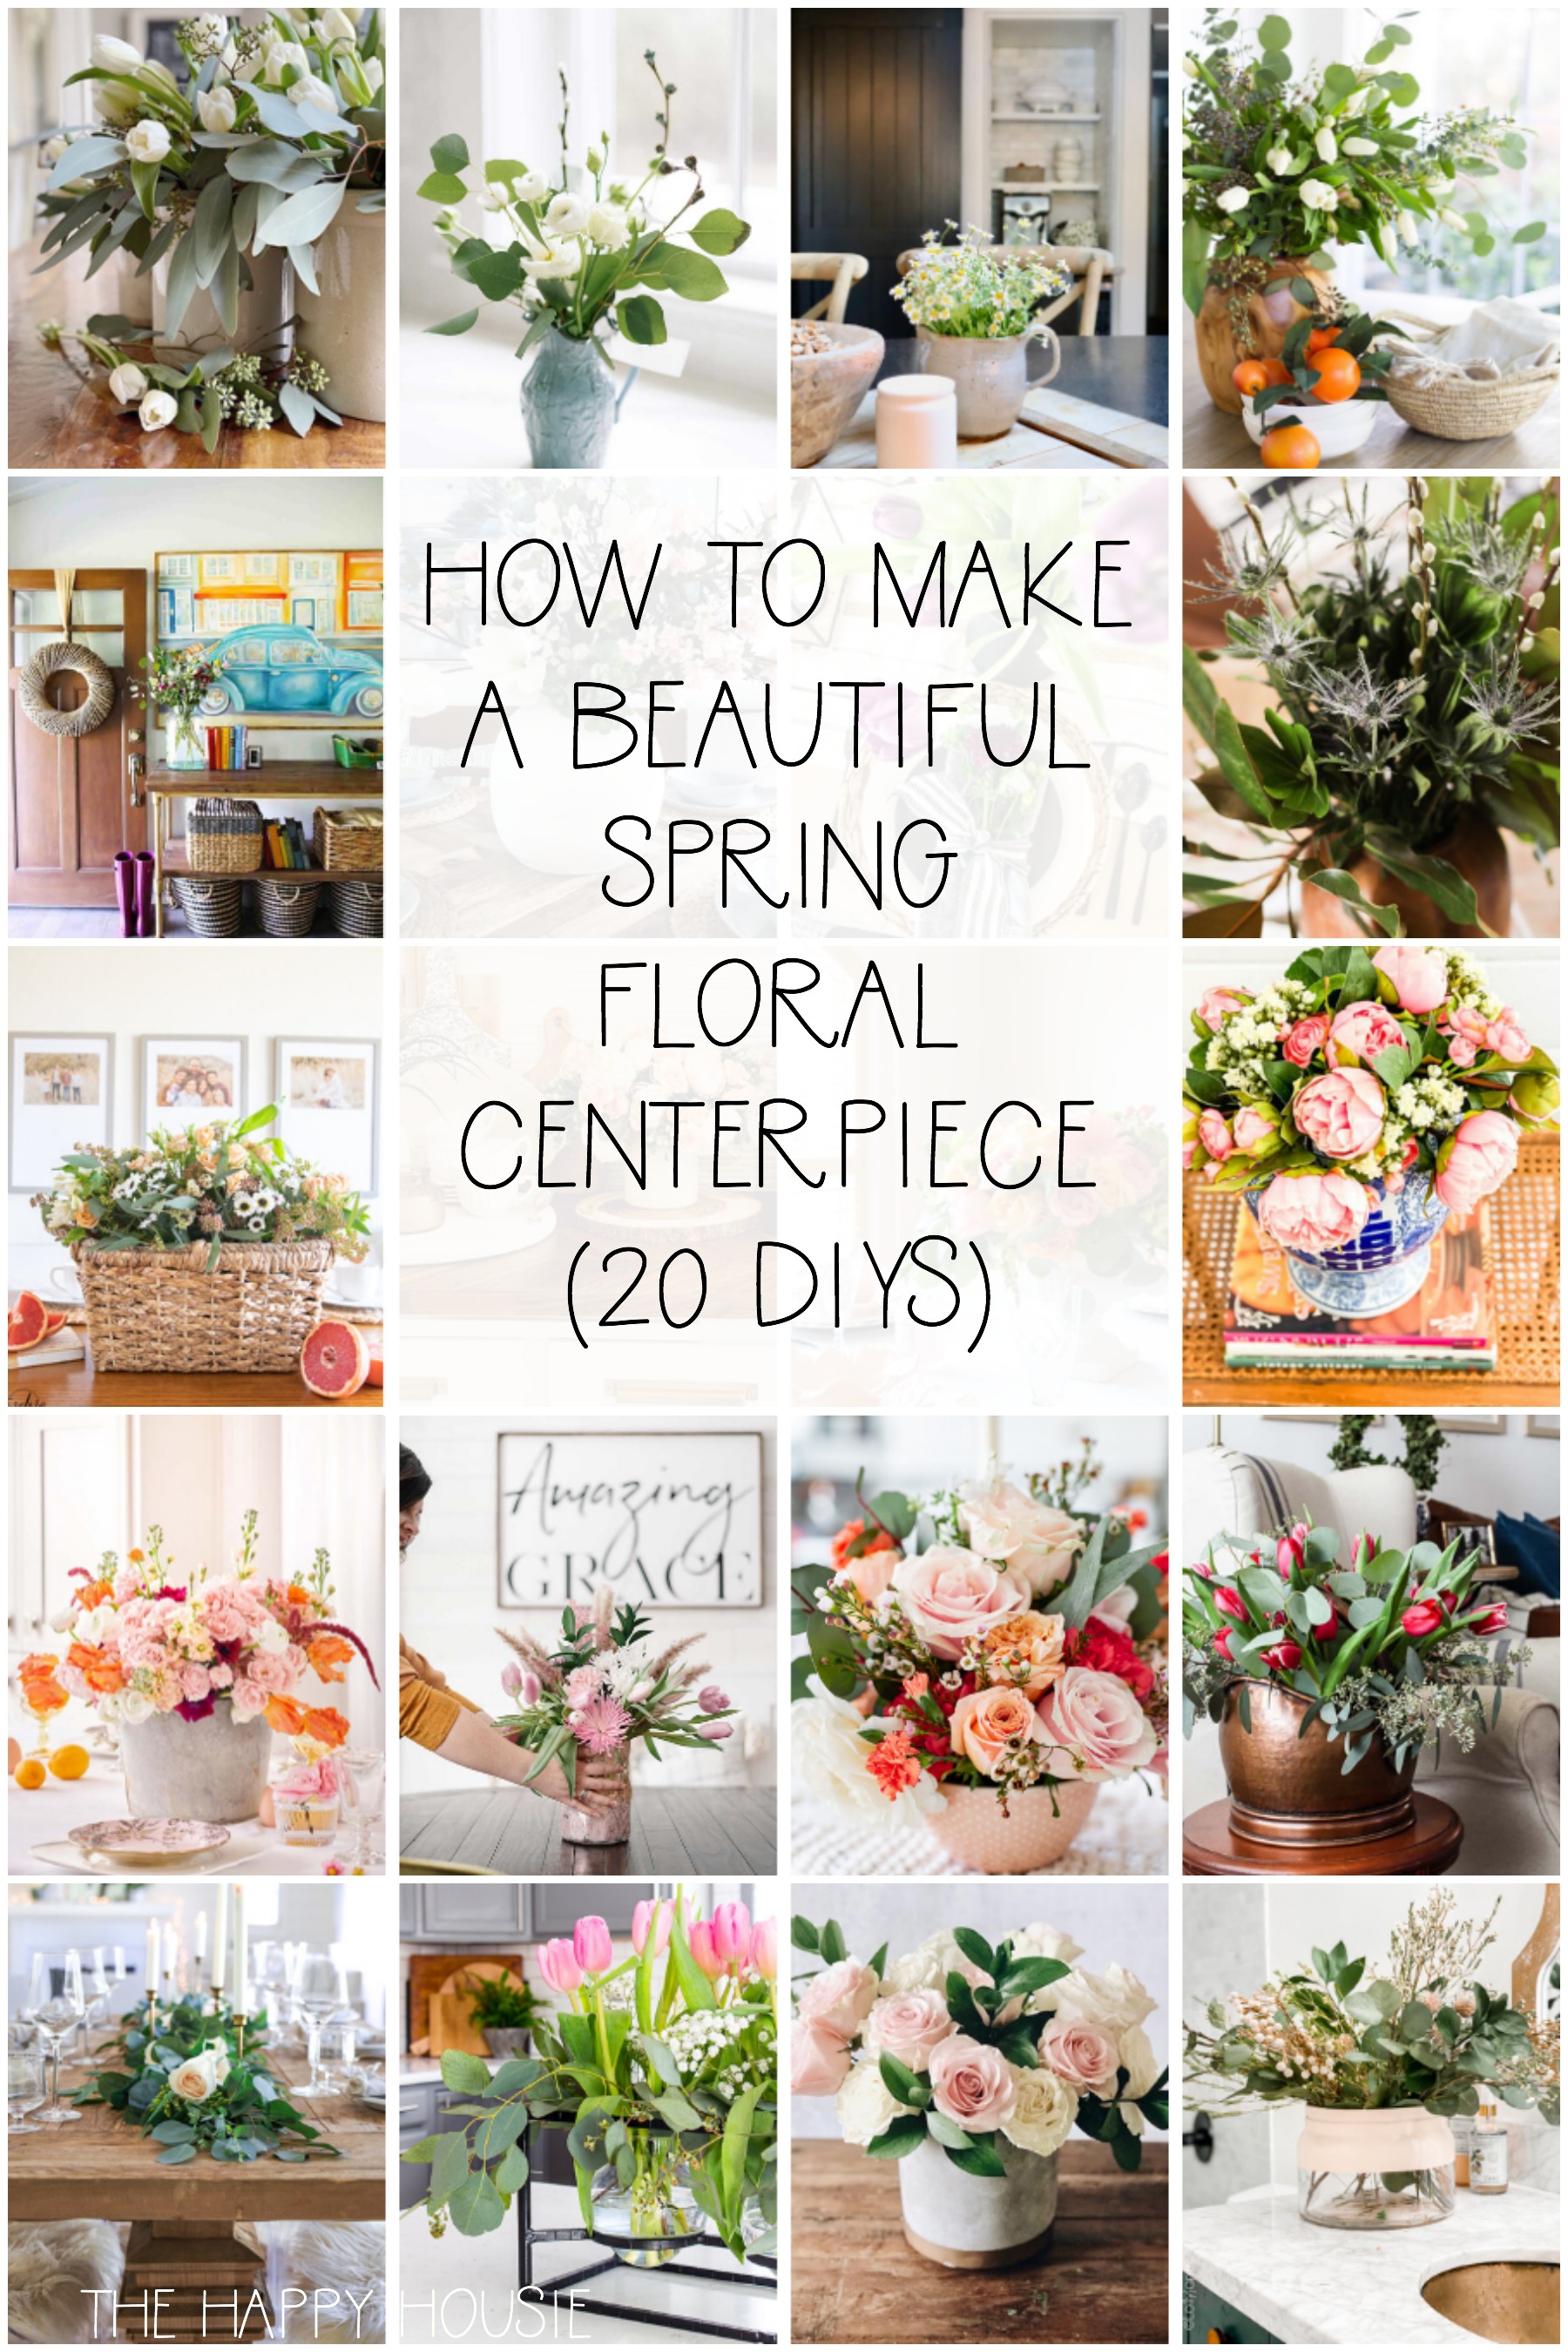 How To Make A Beautiful Spring Floral Centerpiece poster.